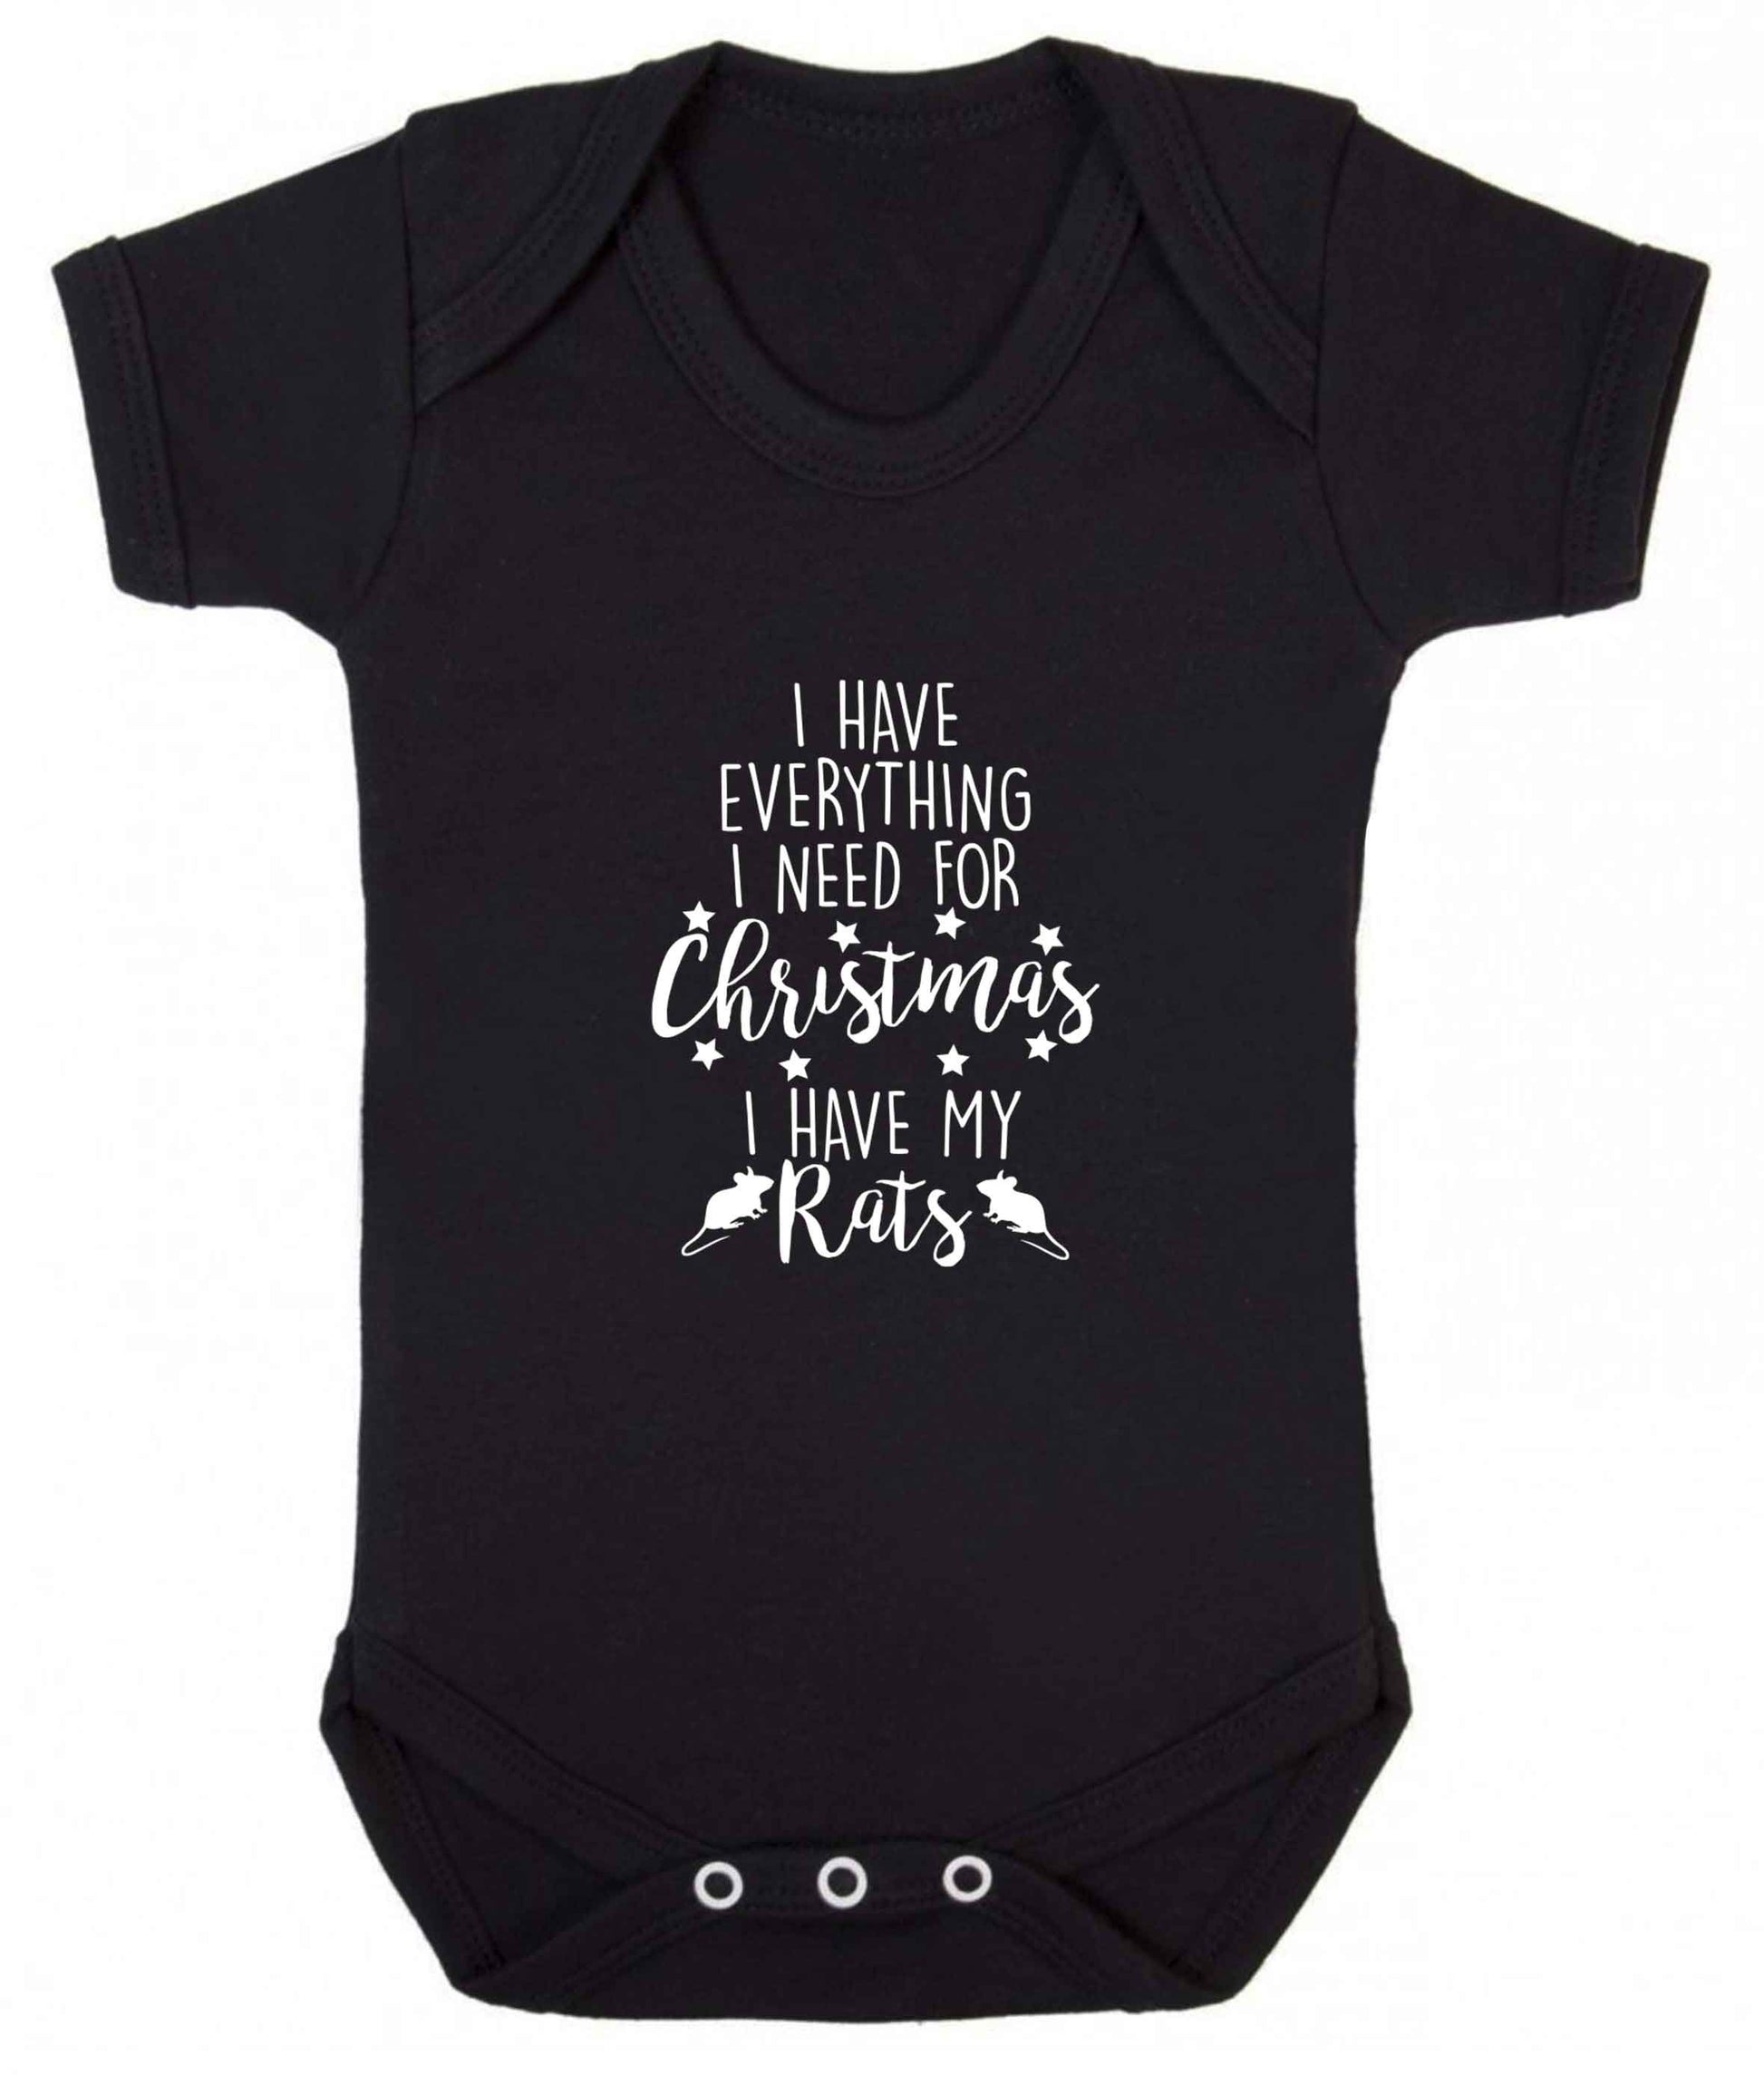 I have everything I need for Christmas I have my rats baby vest black 18-24 months